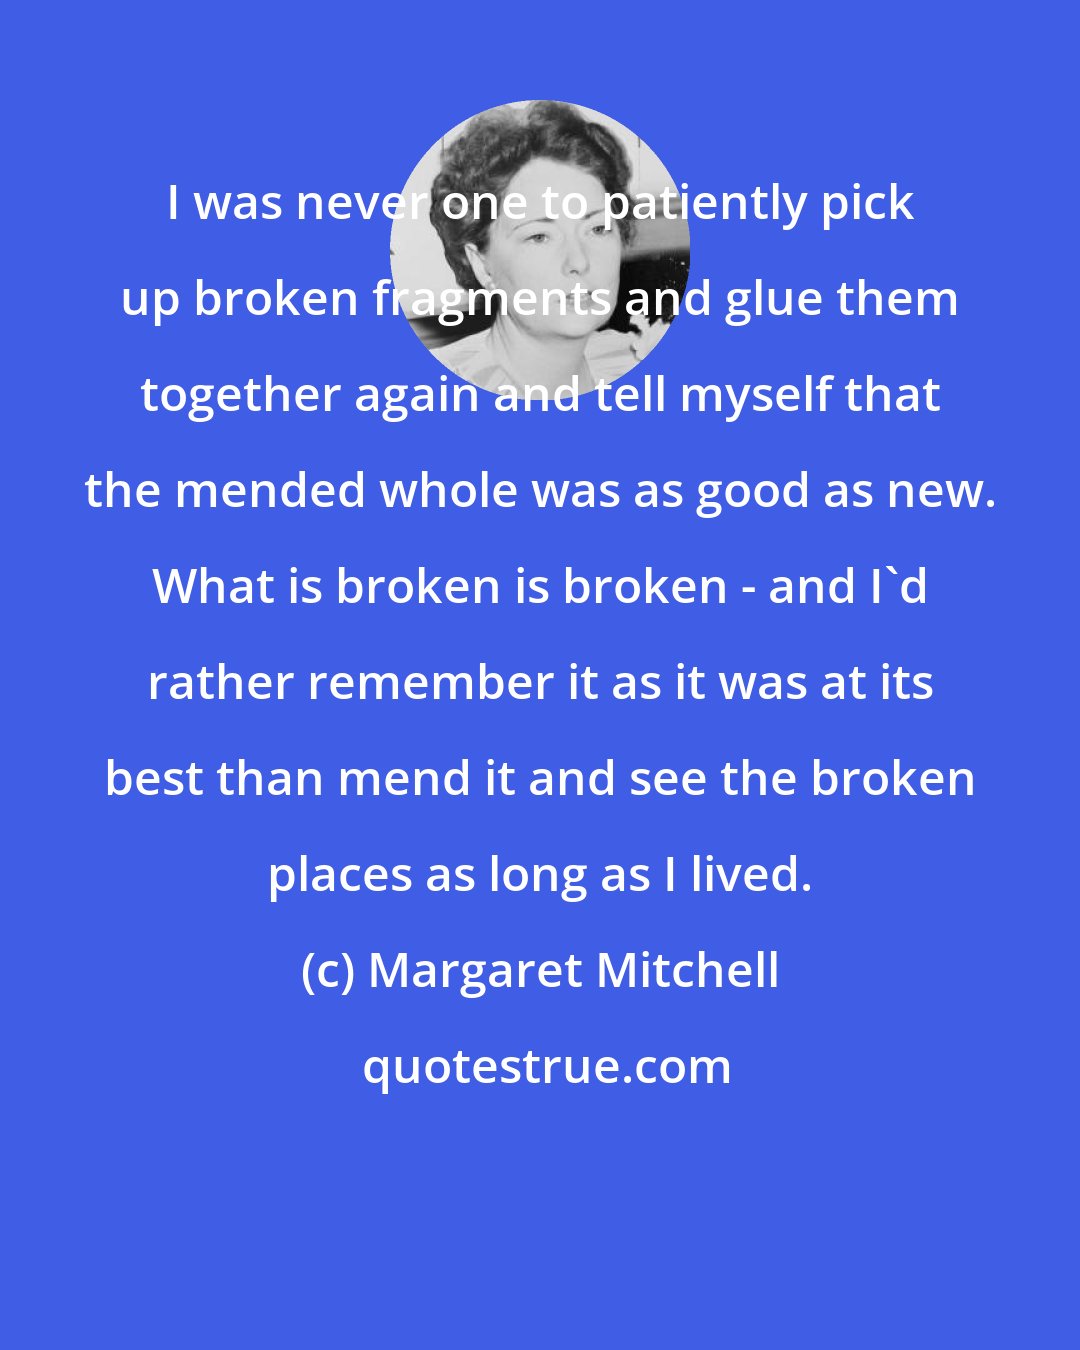 Margaret Mitchell: I was never one to patiently pick up broken fragments and glue them together again and tell myself that the mended whole was as good as new. What is broken is broken - and I'd rather remember it as it was at its best than mend it and see the broken places as long as I lived.